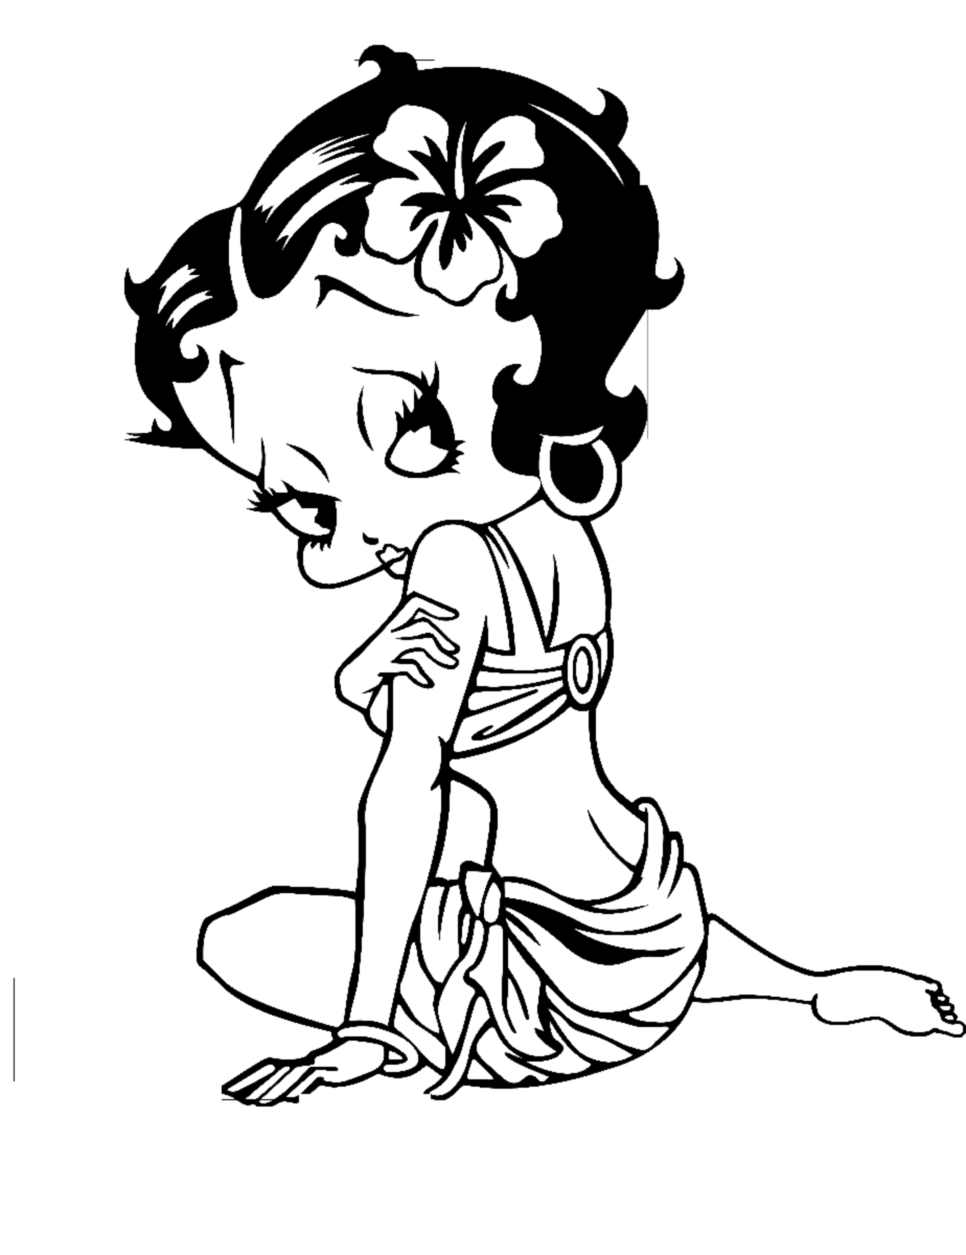 betty boop black and white drawing